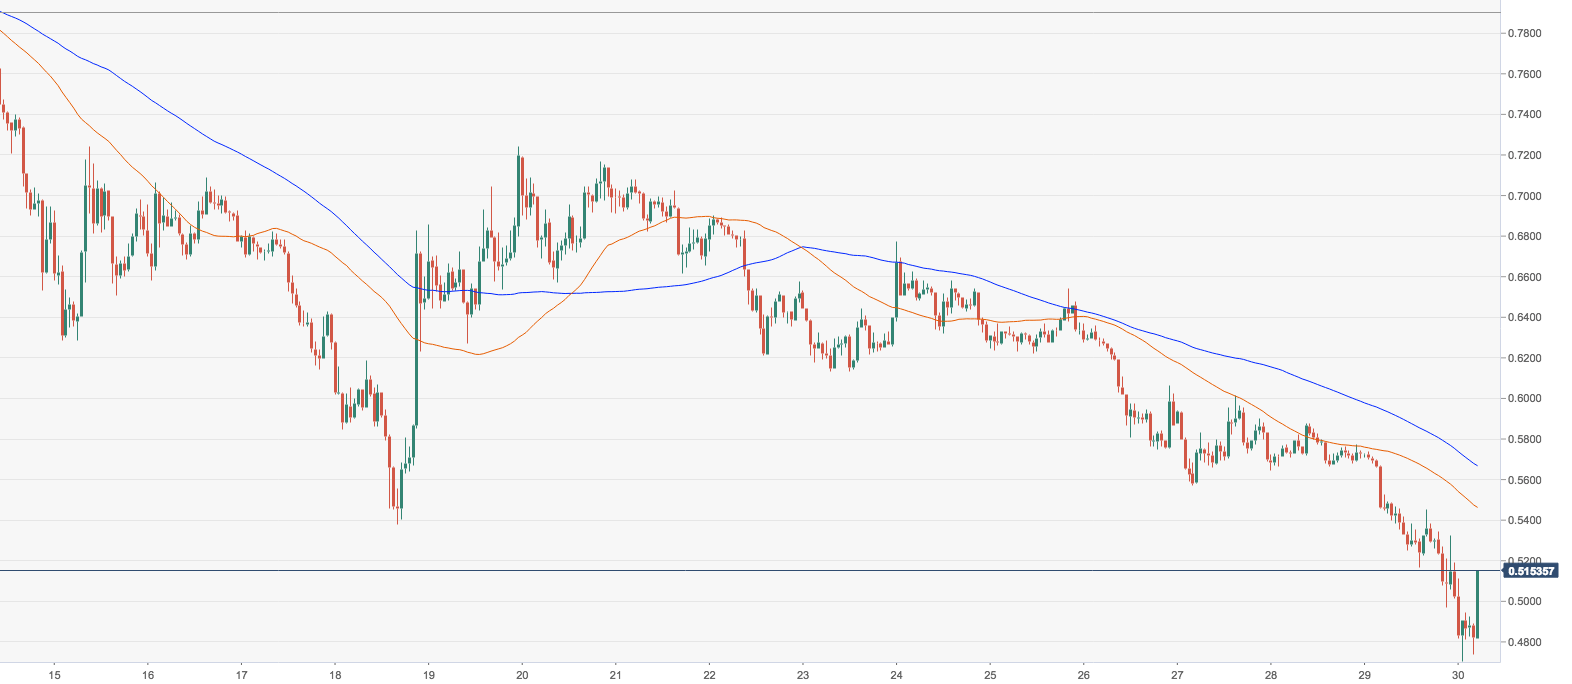 Xrp/usd hourly chart